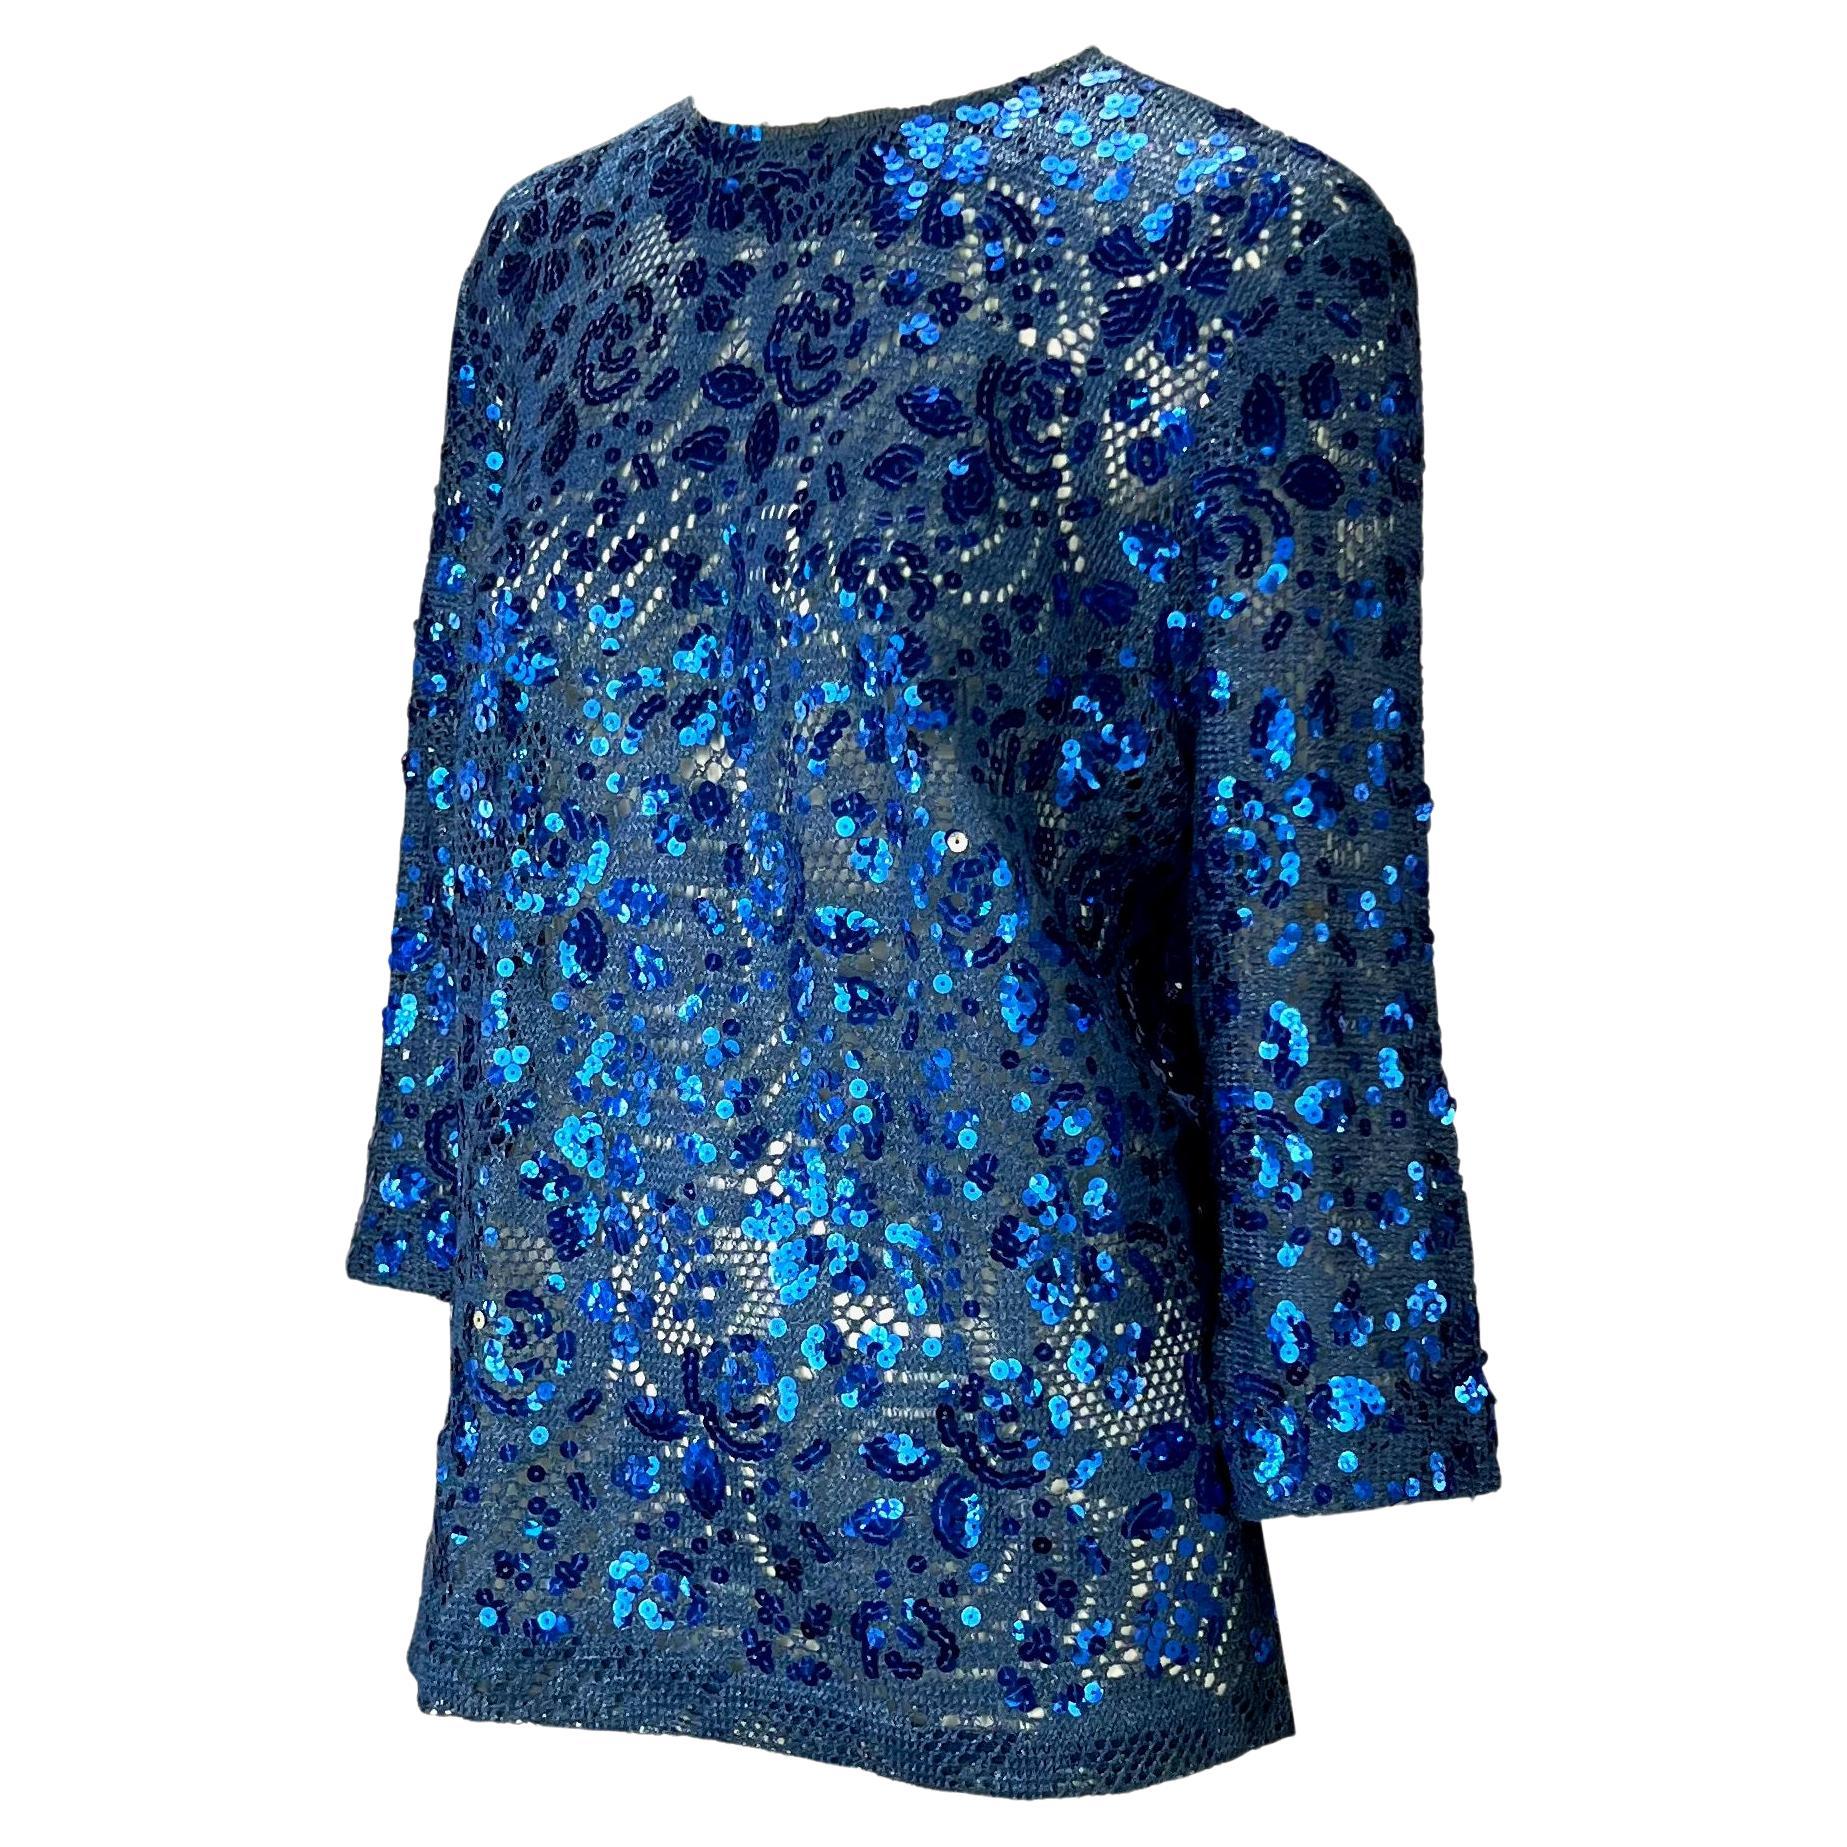 Presenting a blue floral sequin Christian Dior Boutique sweater top, designed by Gianfranco Ferré. From the 1980s, this rare knit top is covered in sequins with a floral design. The top features a wide crew neck and cropped long